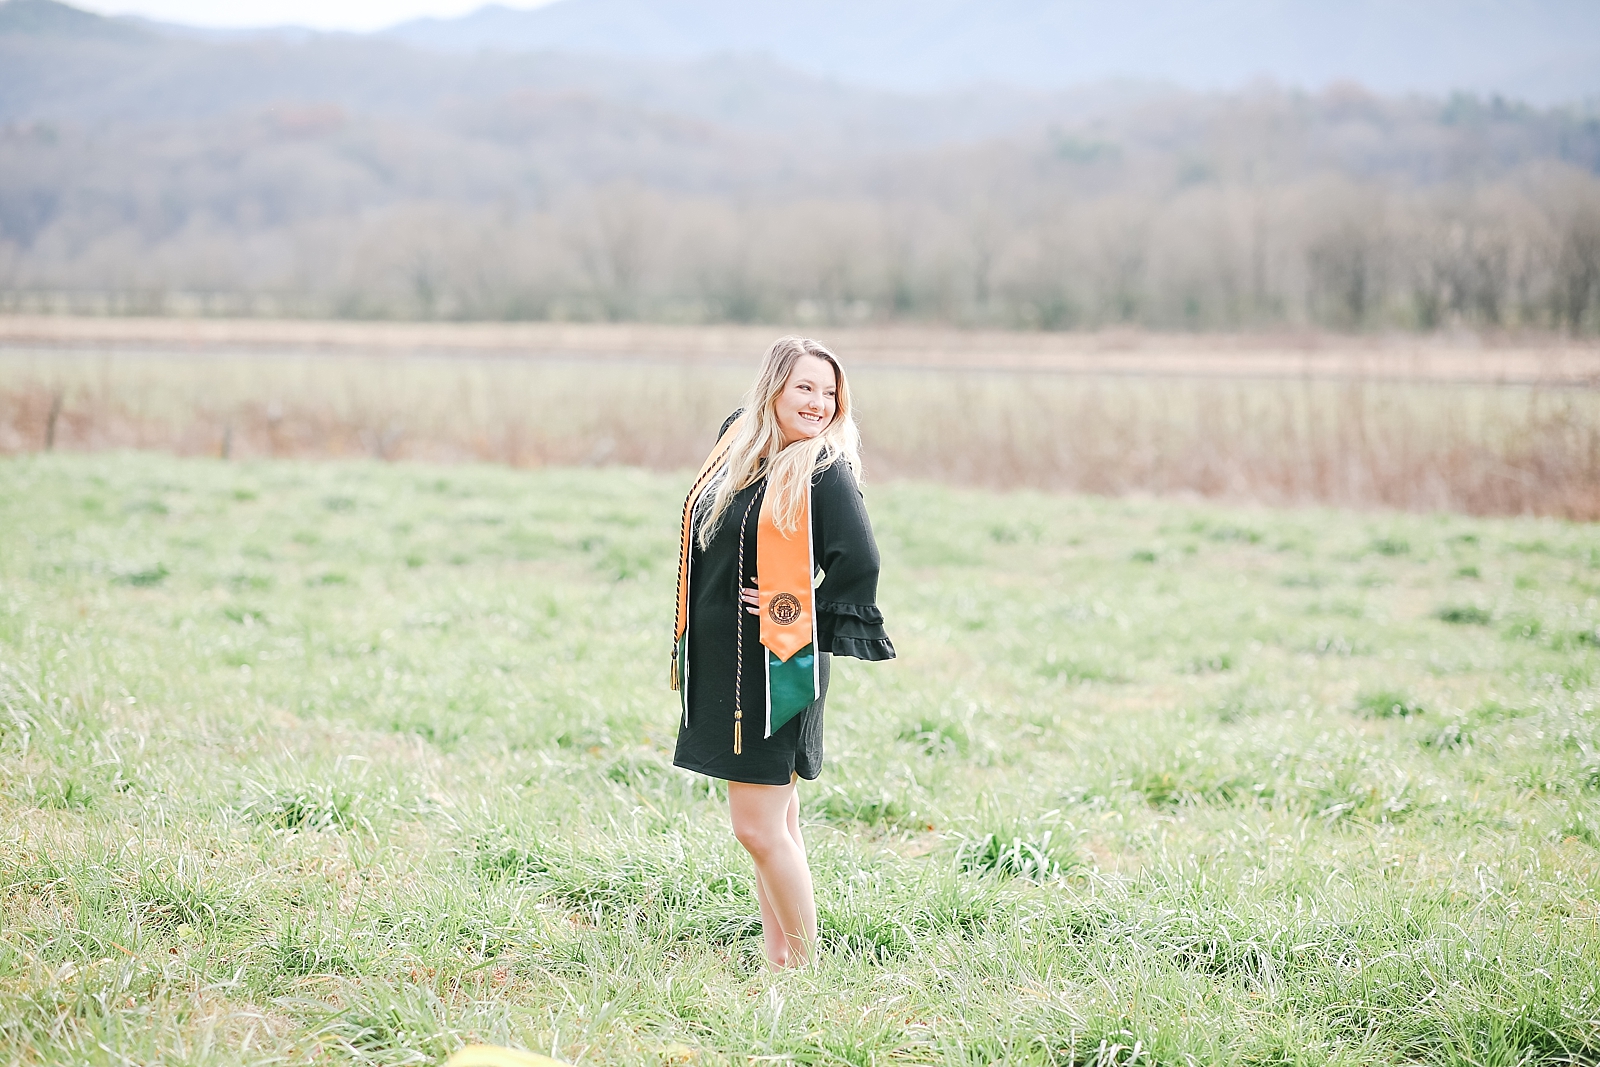 Kennesaw State University Senior Session Rachel in graduation gown standing in field with mountains in the background smiling over her shoulder photo